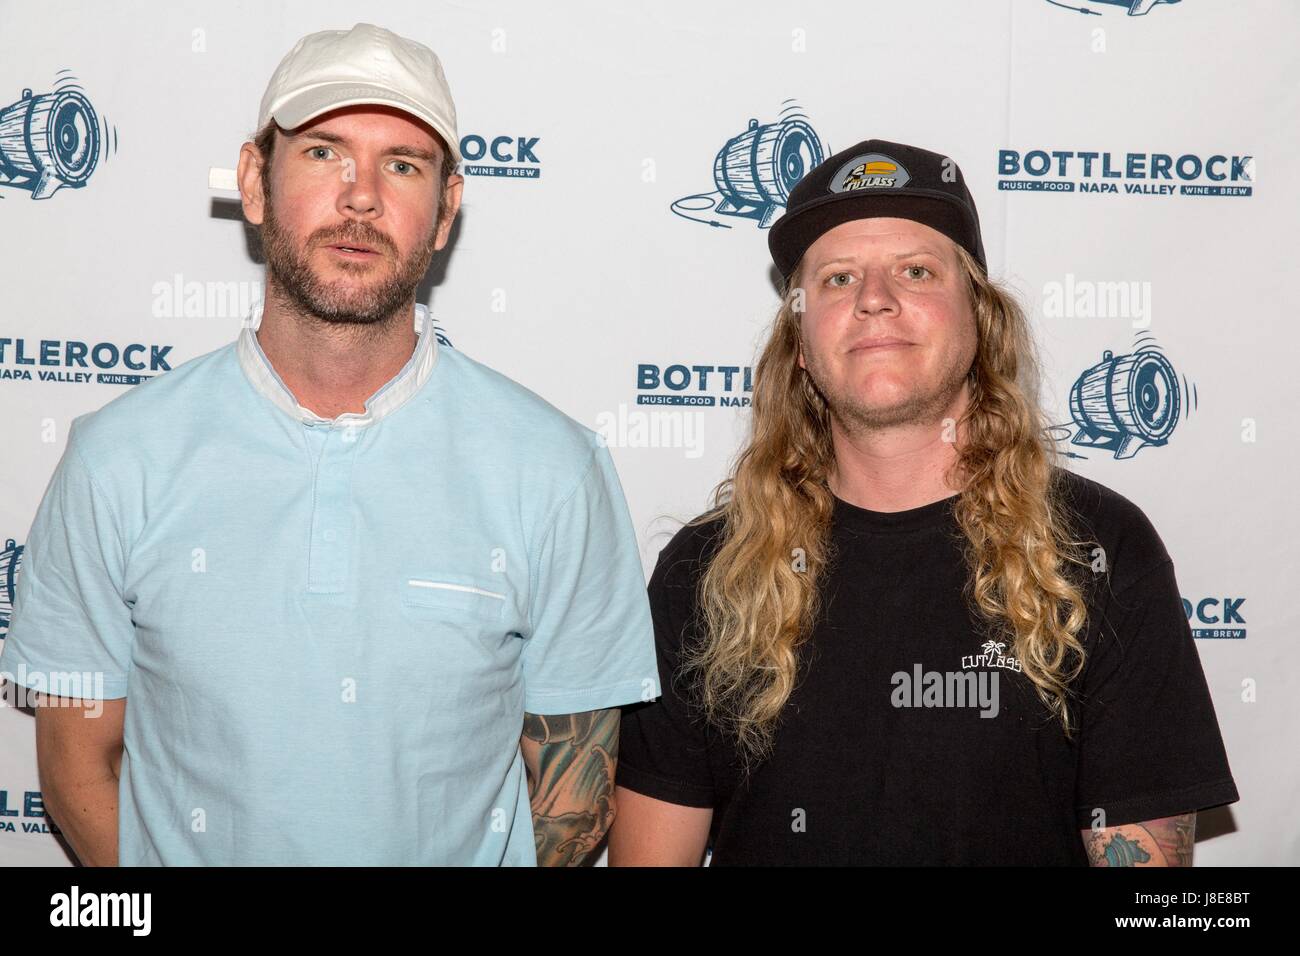 This is Jared Waston, lead singer of the Dirty Heads! Our new